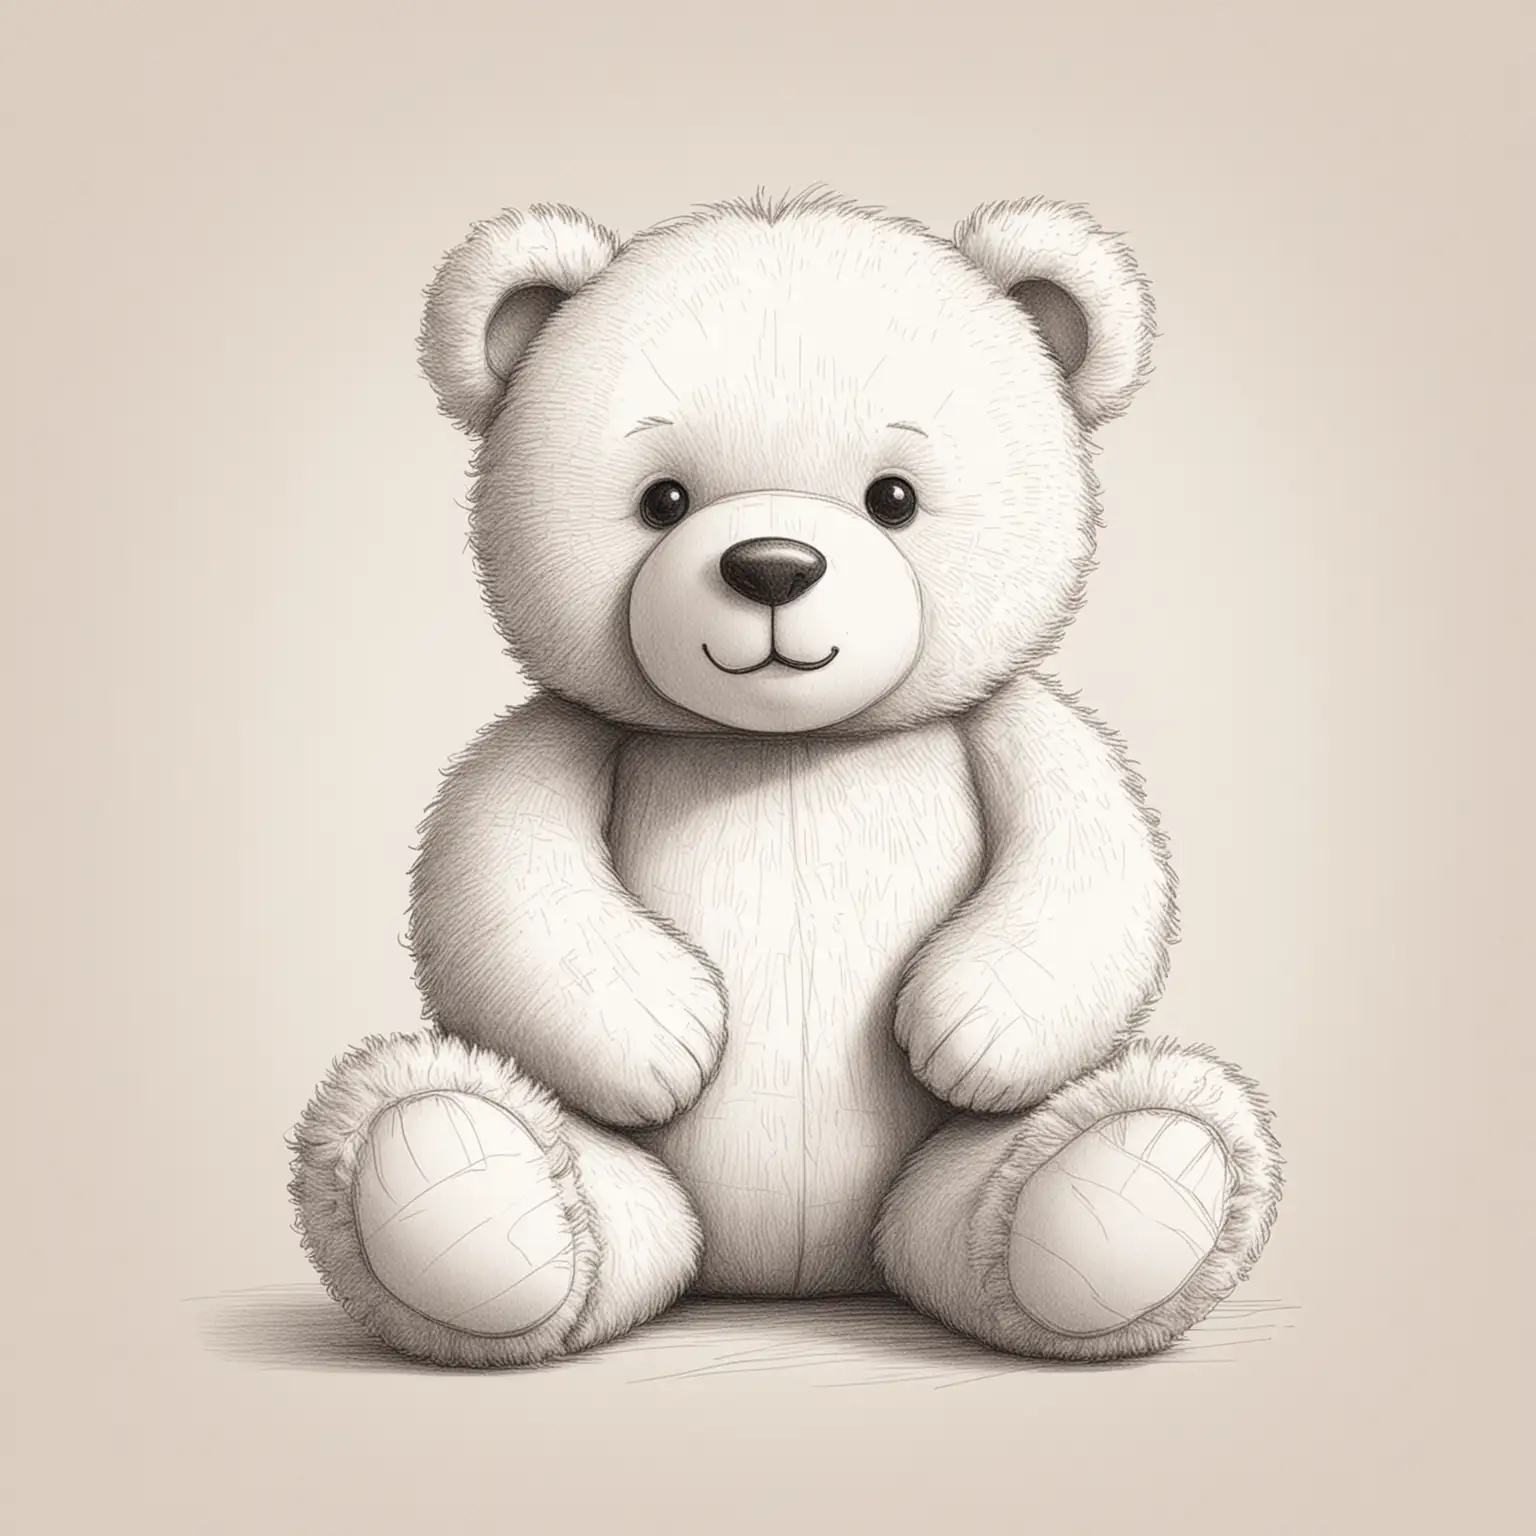 simple and minimal pencil single line art of [cute fluffy teddy bear with a friendly face sitting on a pillow], pencil sketch style illustration; white background, sharp lines, grainy
texture --v 5 --s 800
